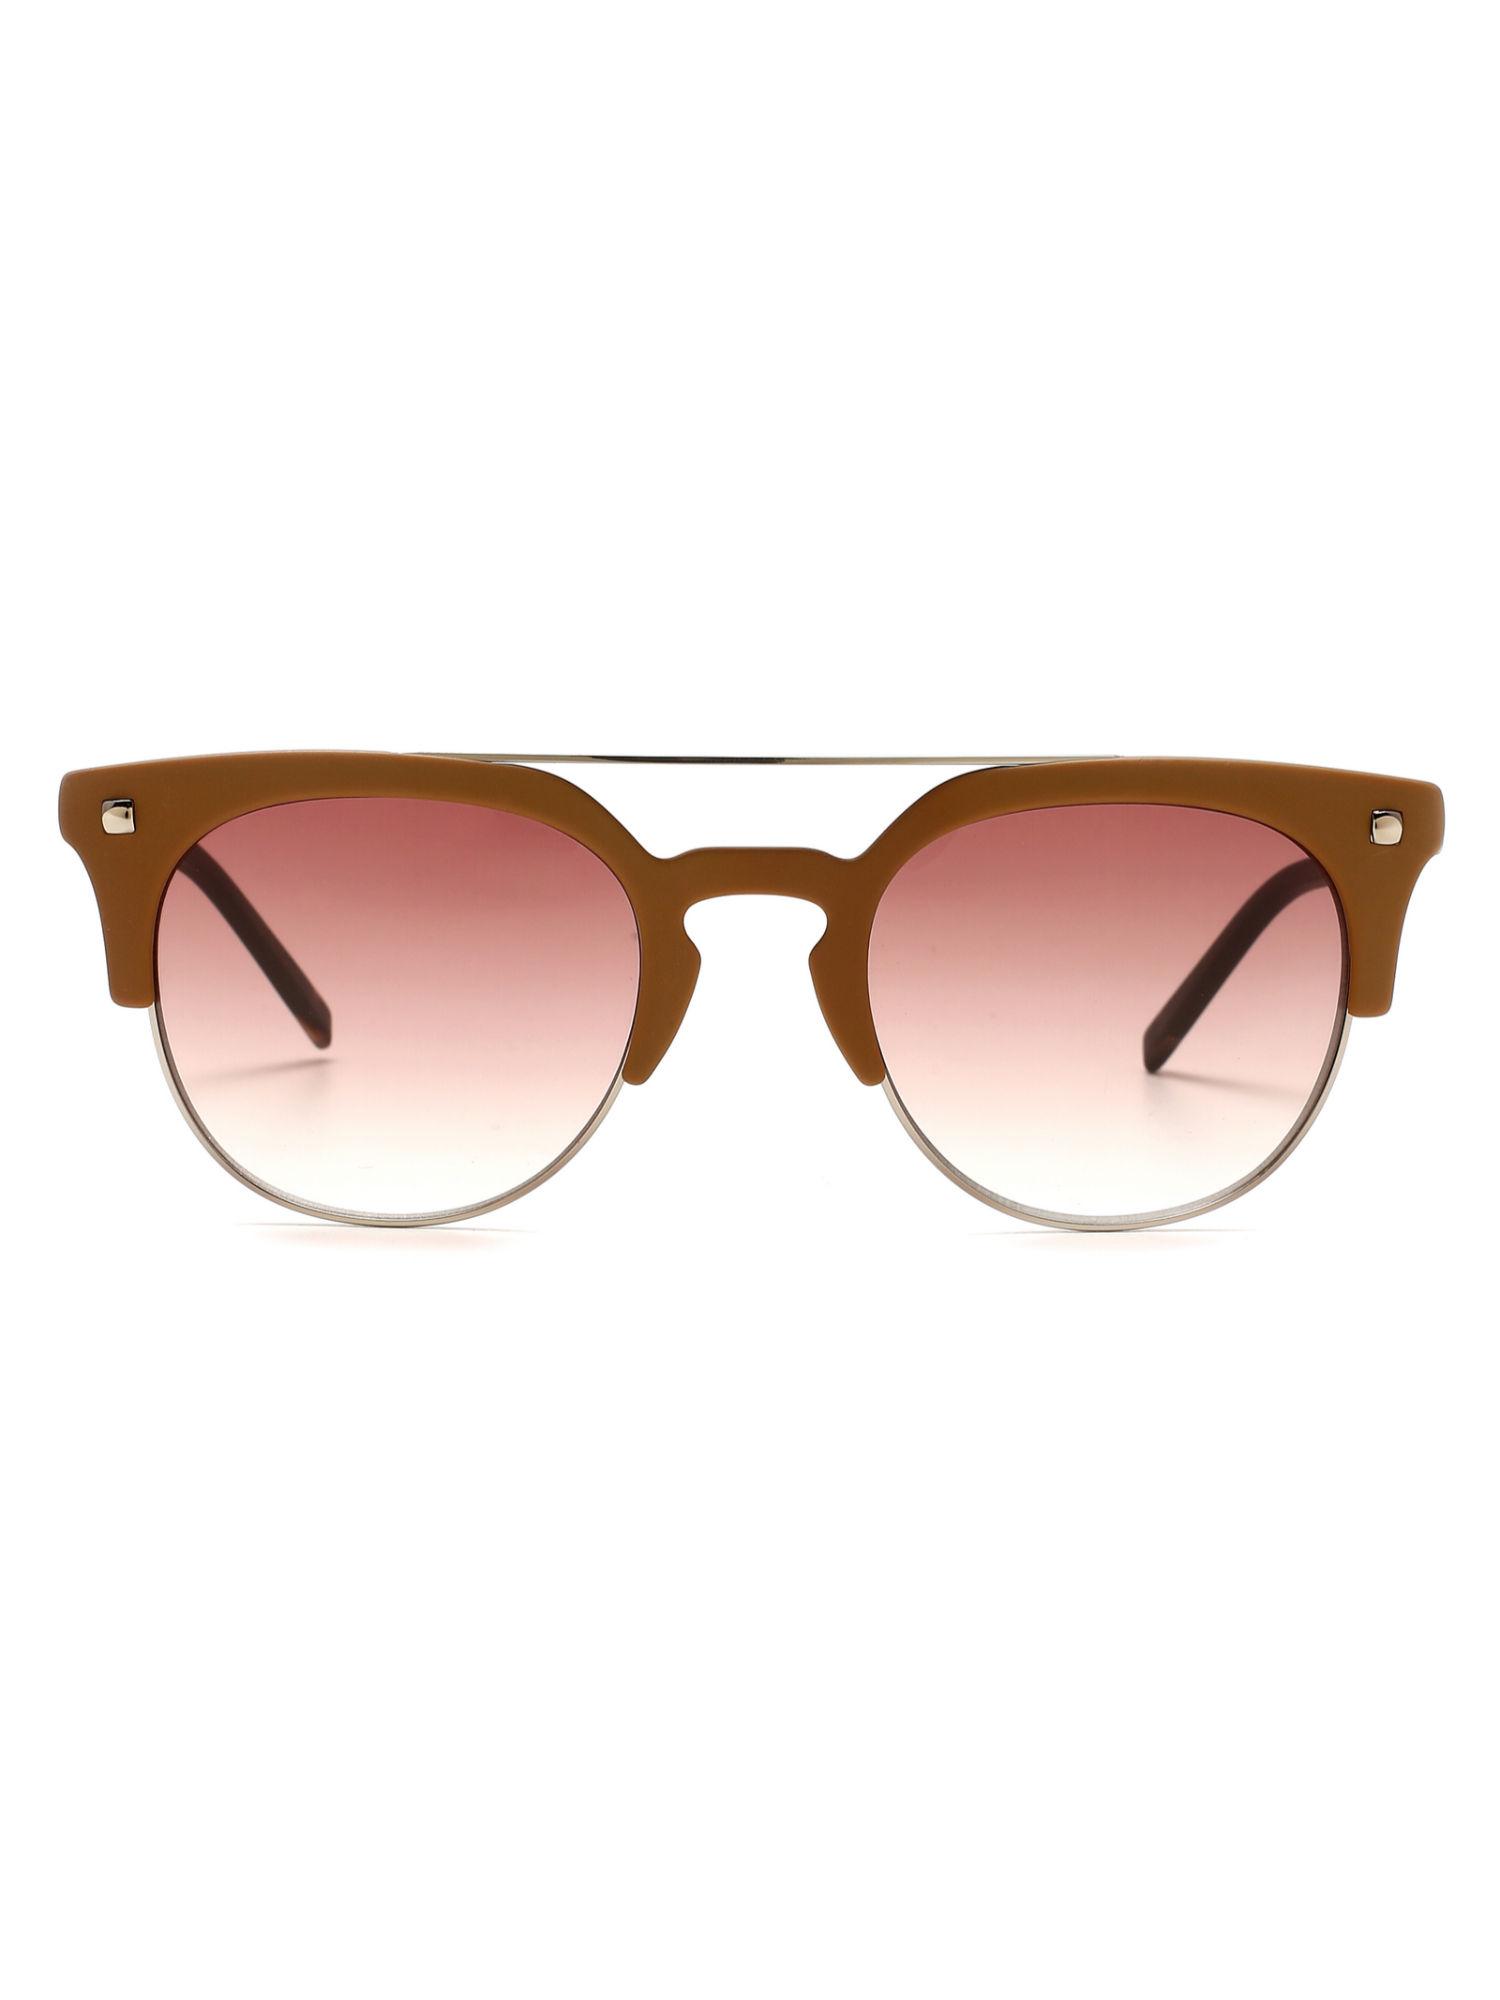 round-sunglasses-with-pink-lens-for-men